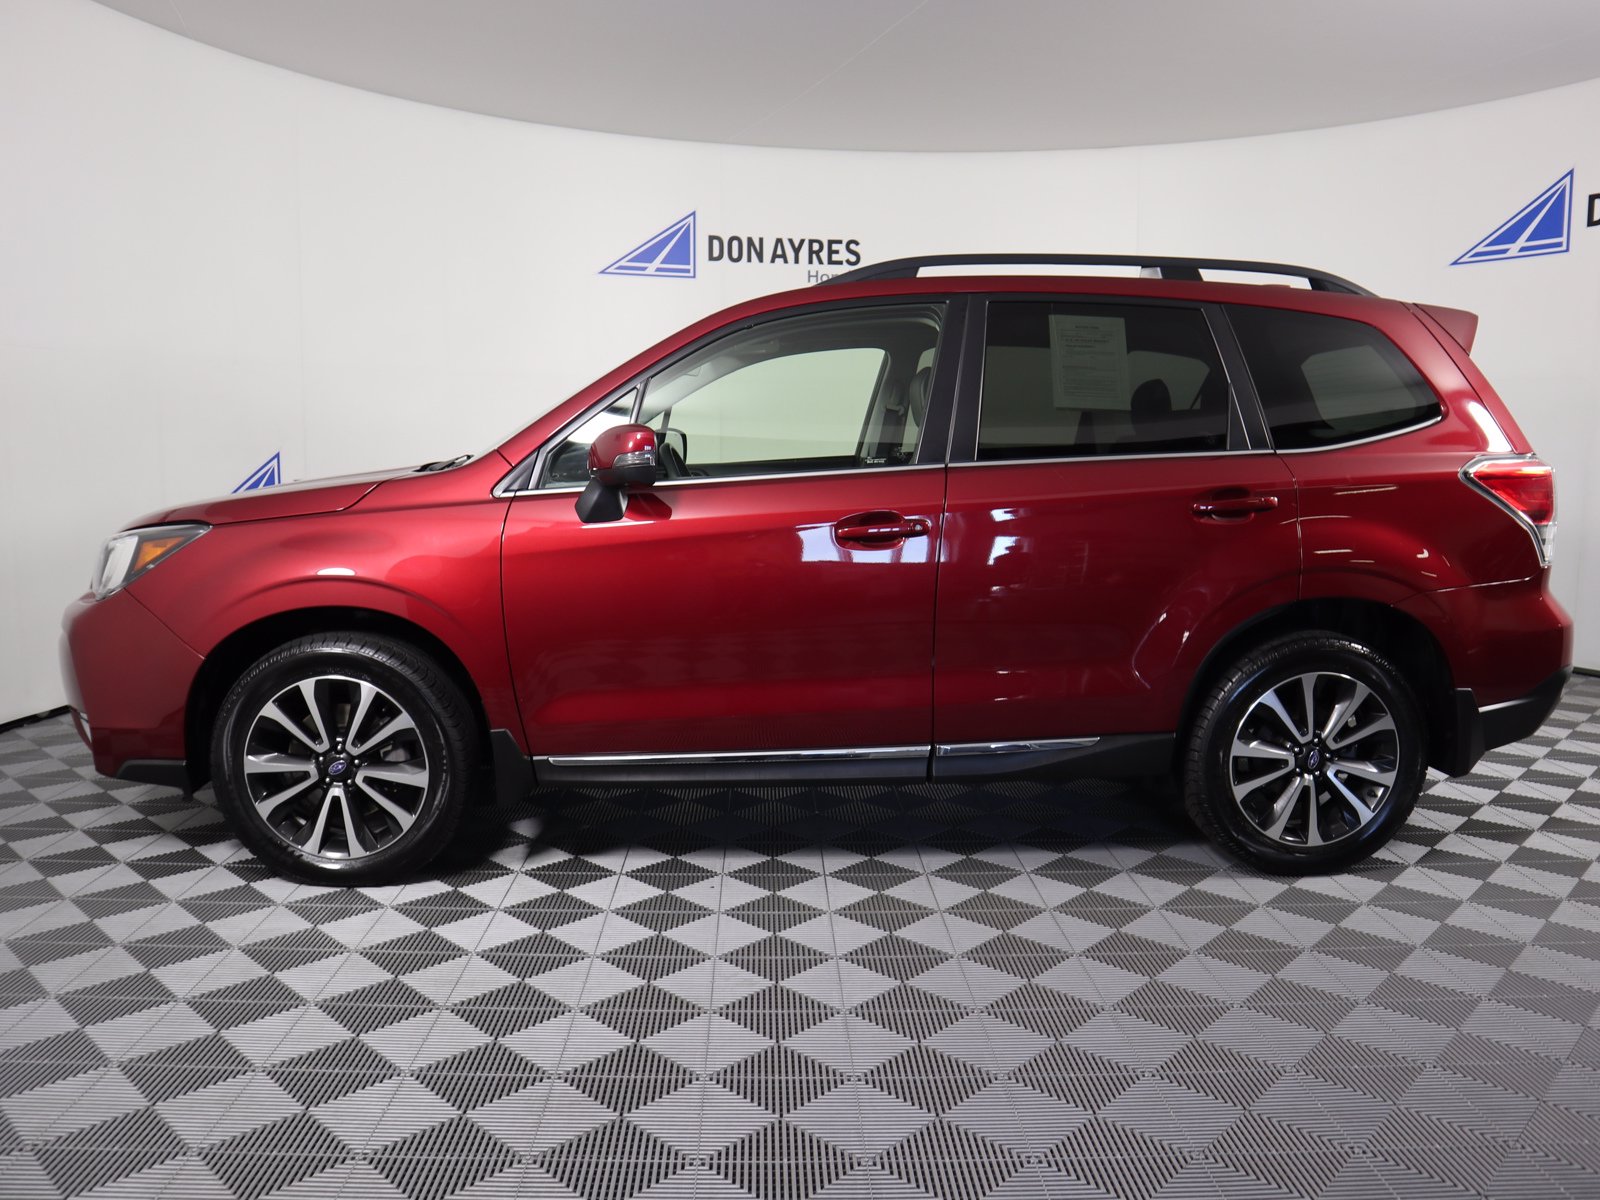 PreOwned 2017 Subaru Forester 2.0XT Touring AWD